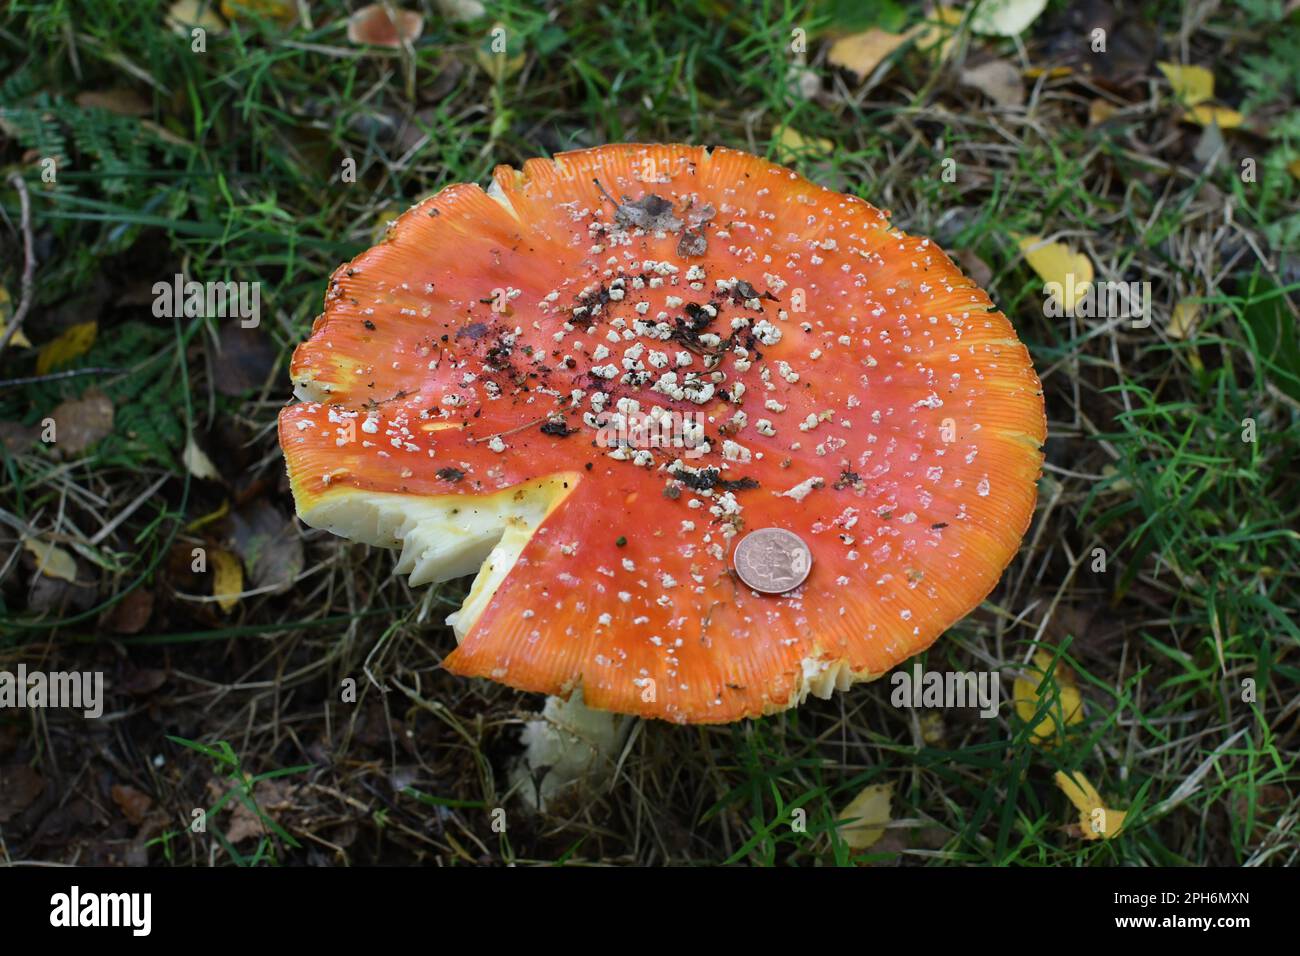 Fly agaric mushroom (Amanita muscaria), taken at Thornley Woods, Gateshead, North East England. A big specimen with a penny shown for scale! Stock Photo